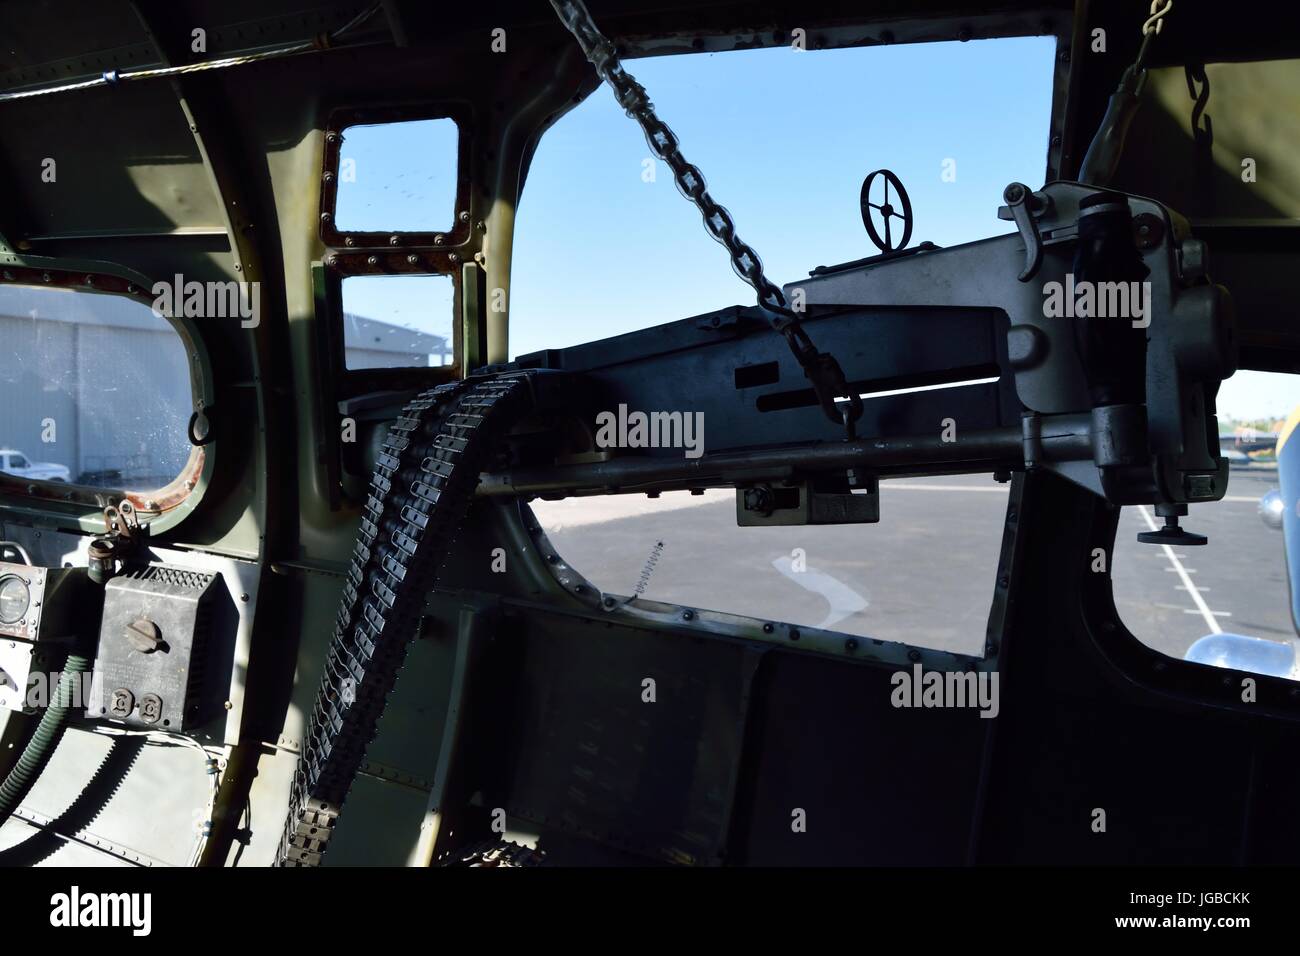 Interior of a Boeing B17 Stock Photo